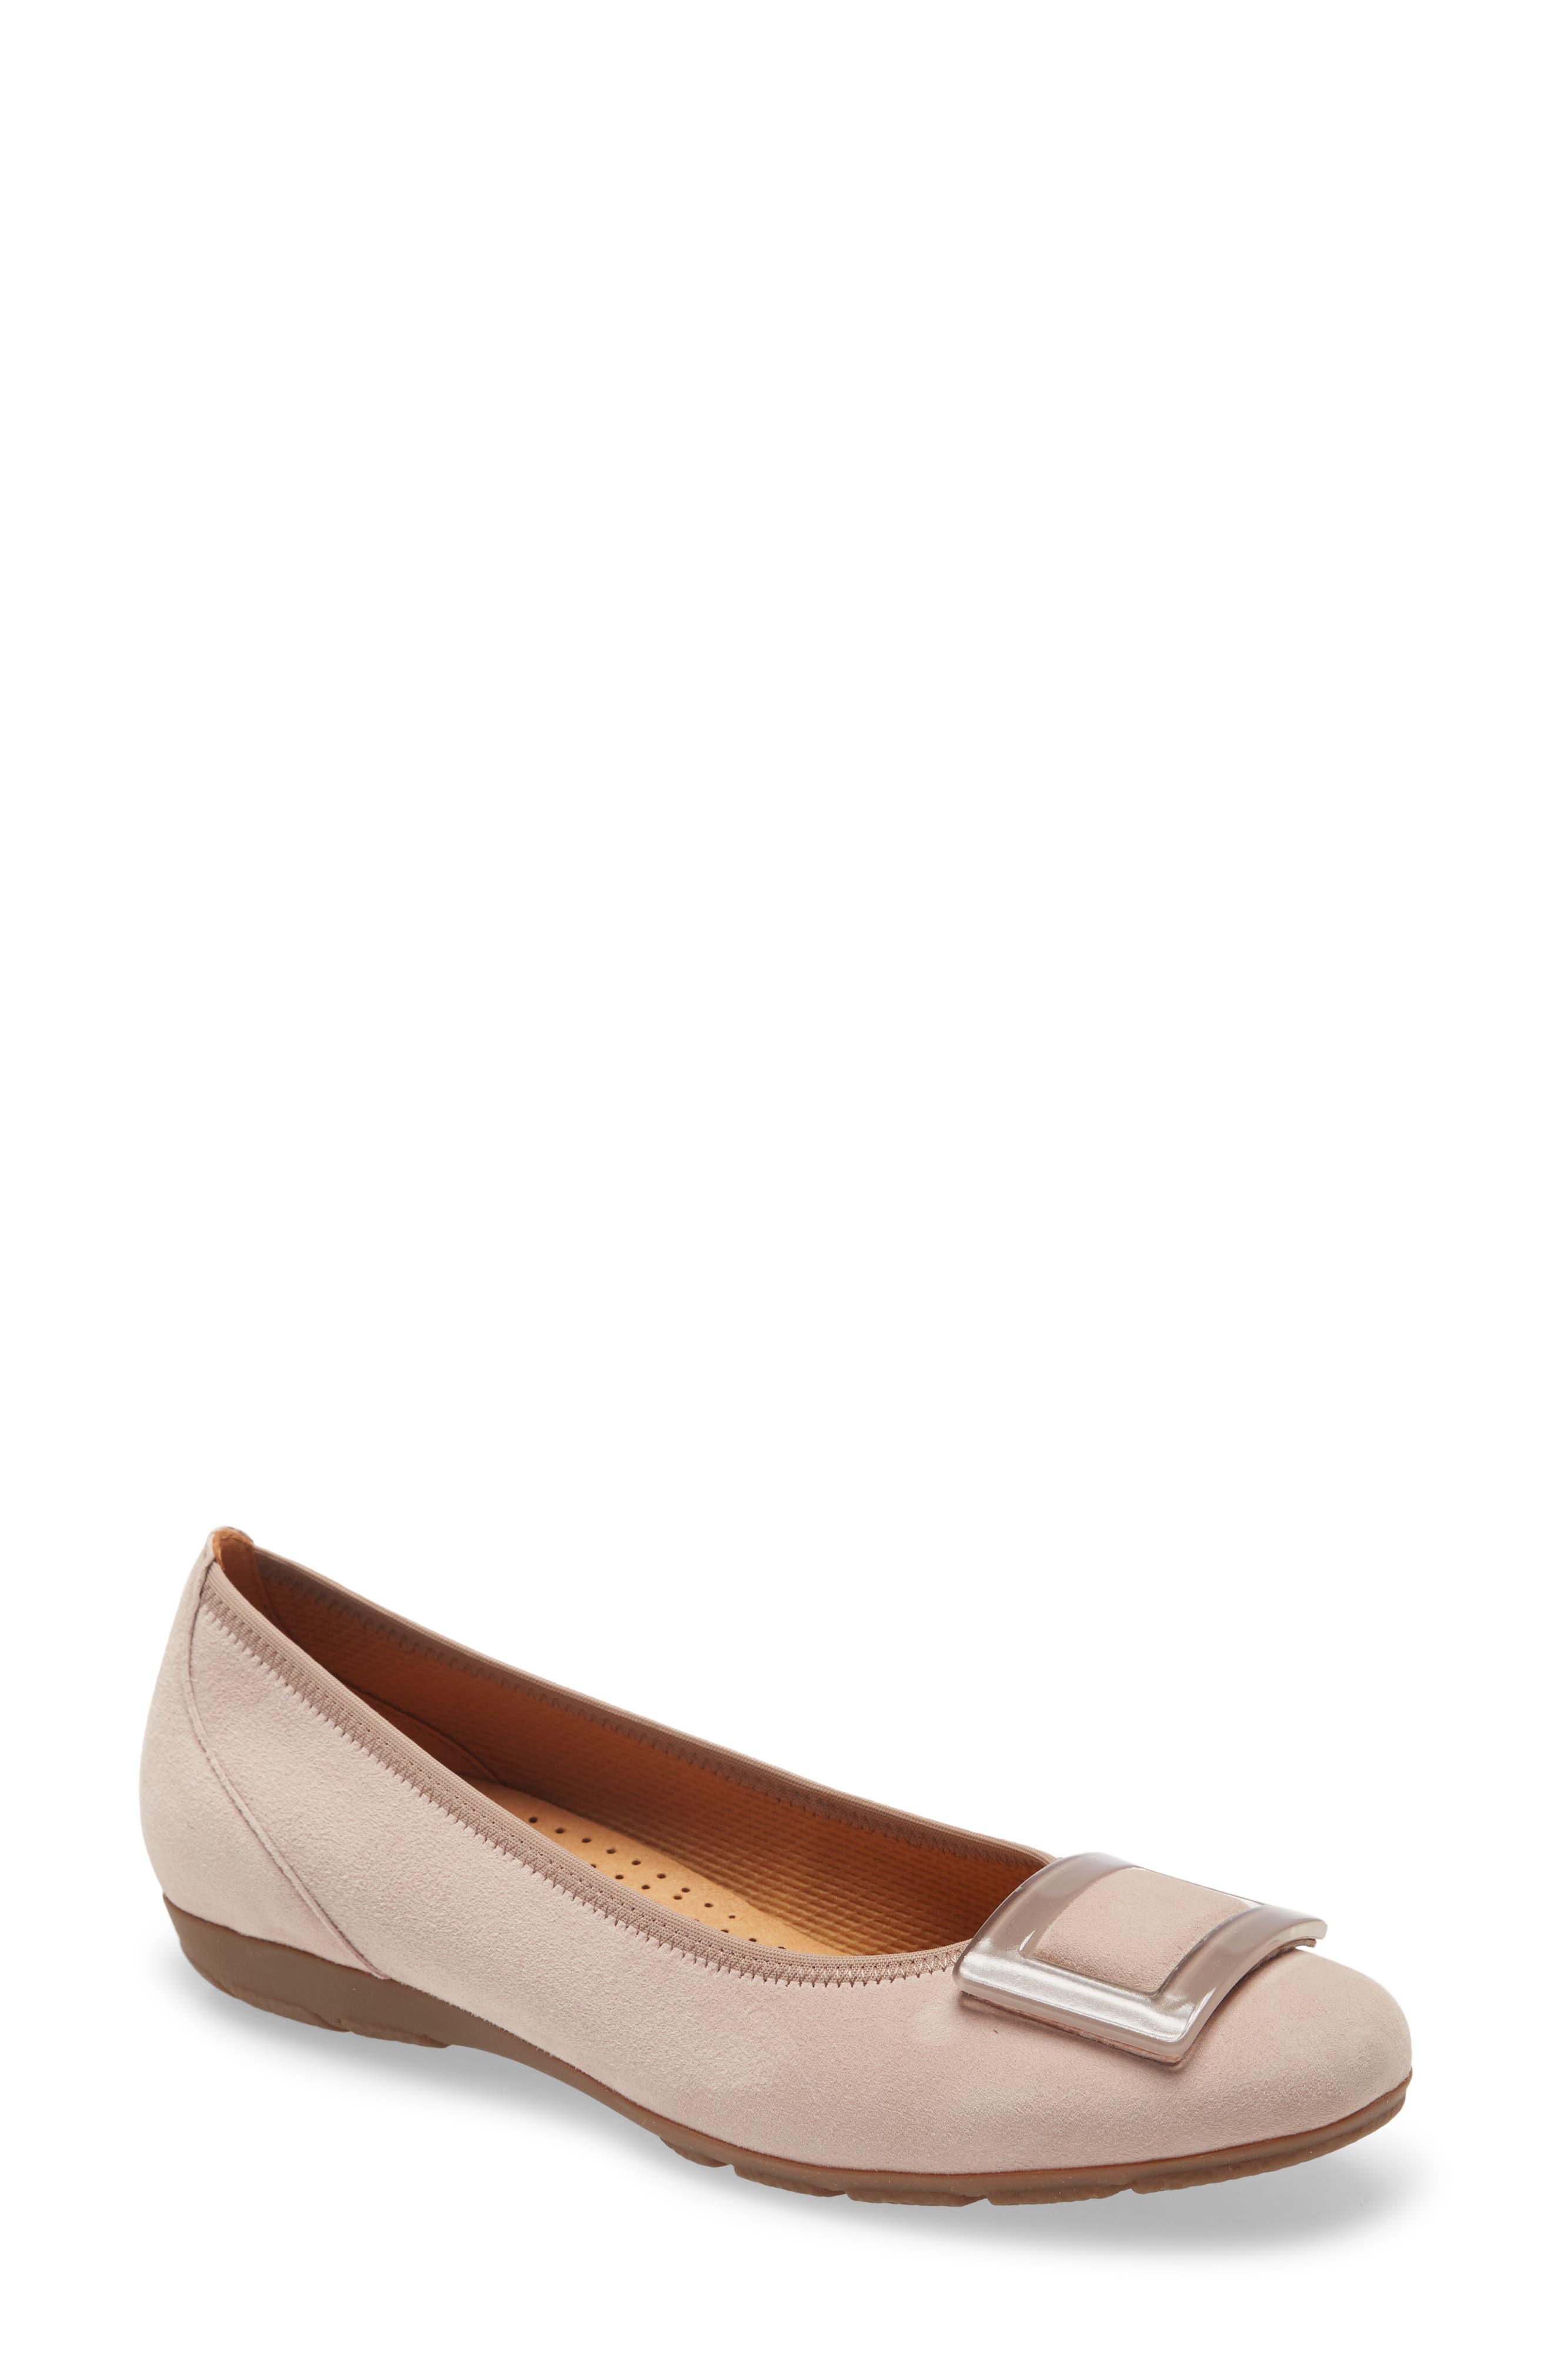 Gabor Shoes Womens Gabor Casual Ballet Flat 